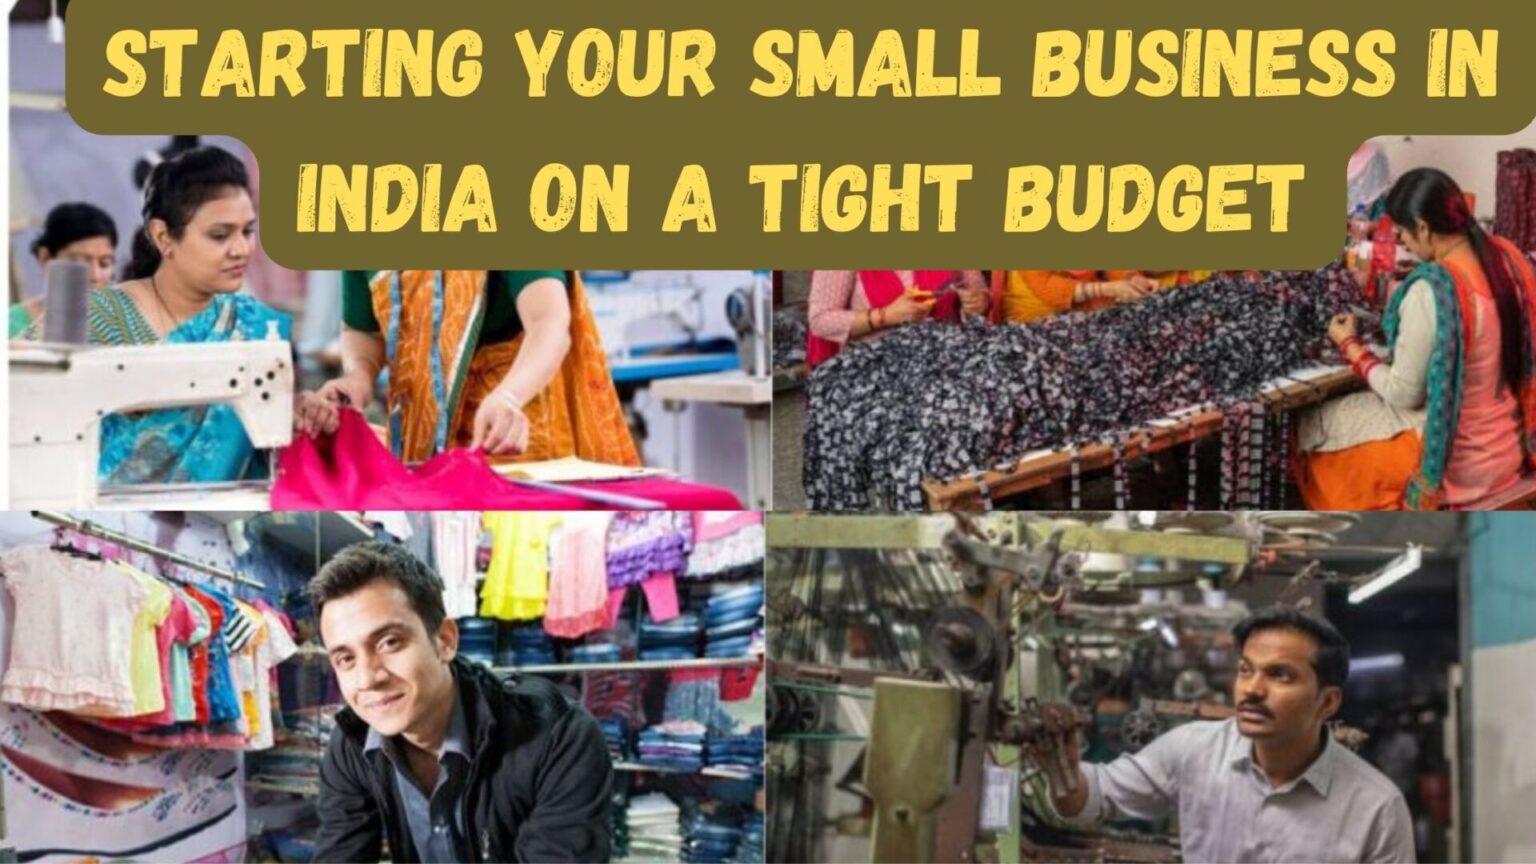 Starting Your Small Business in India on a Tight Budget